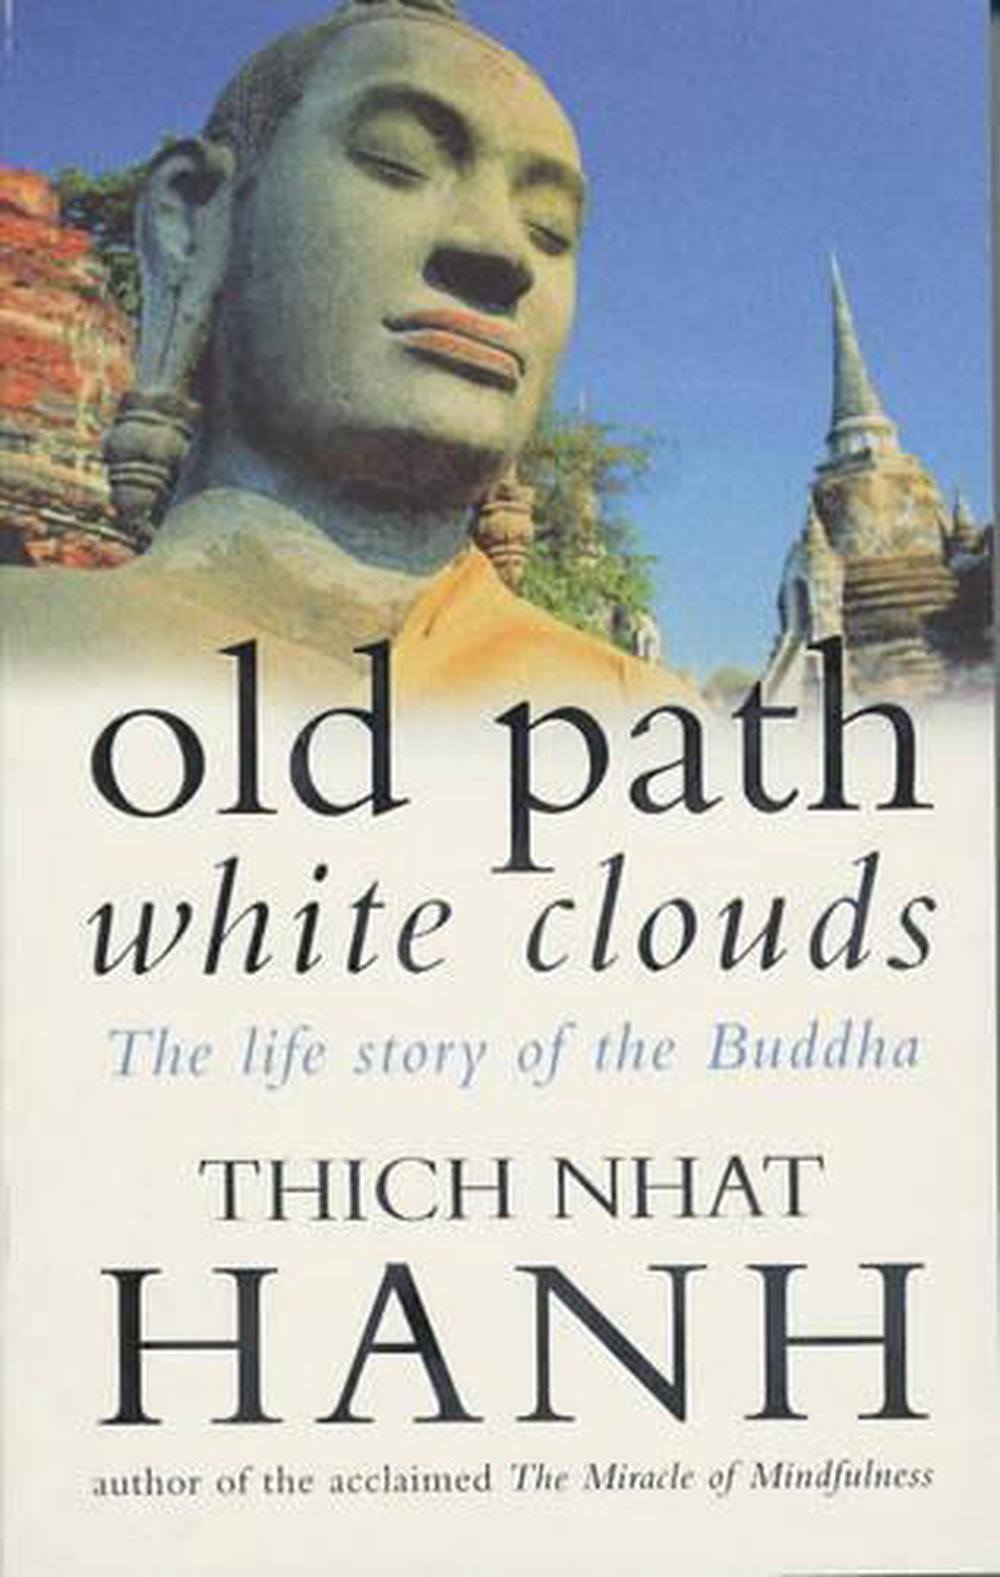 Old Path White Clouds - The Life Story of The Buddha